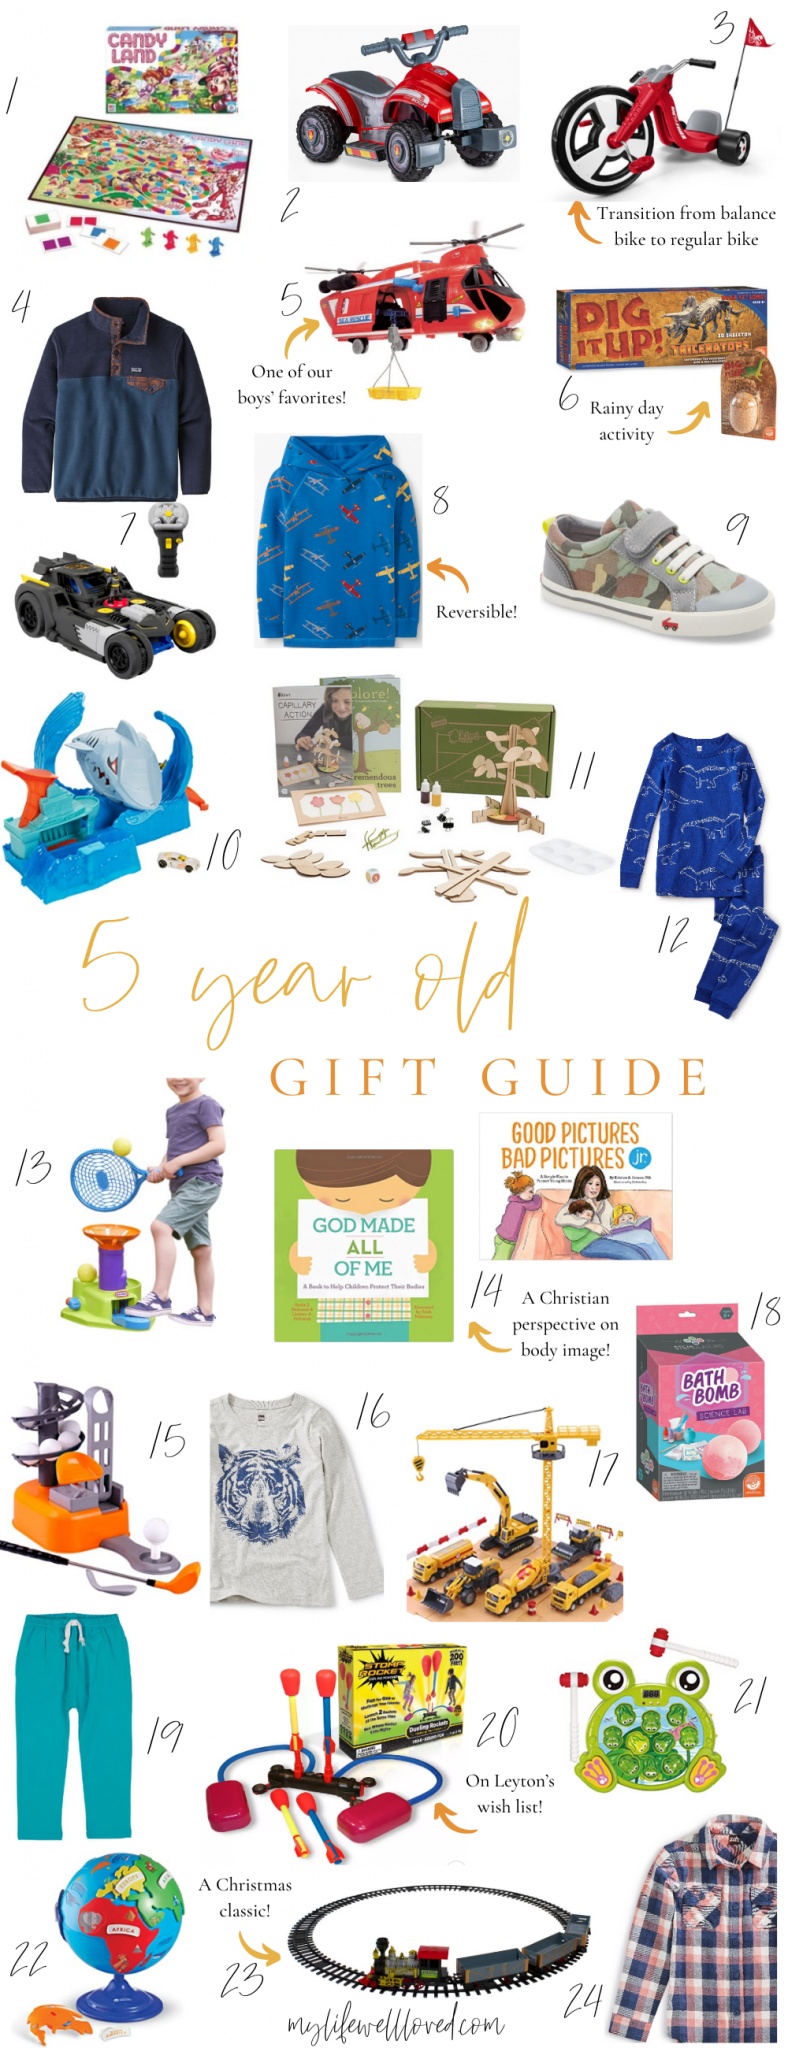 top 10 gifts for 5 year old boy